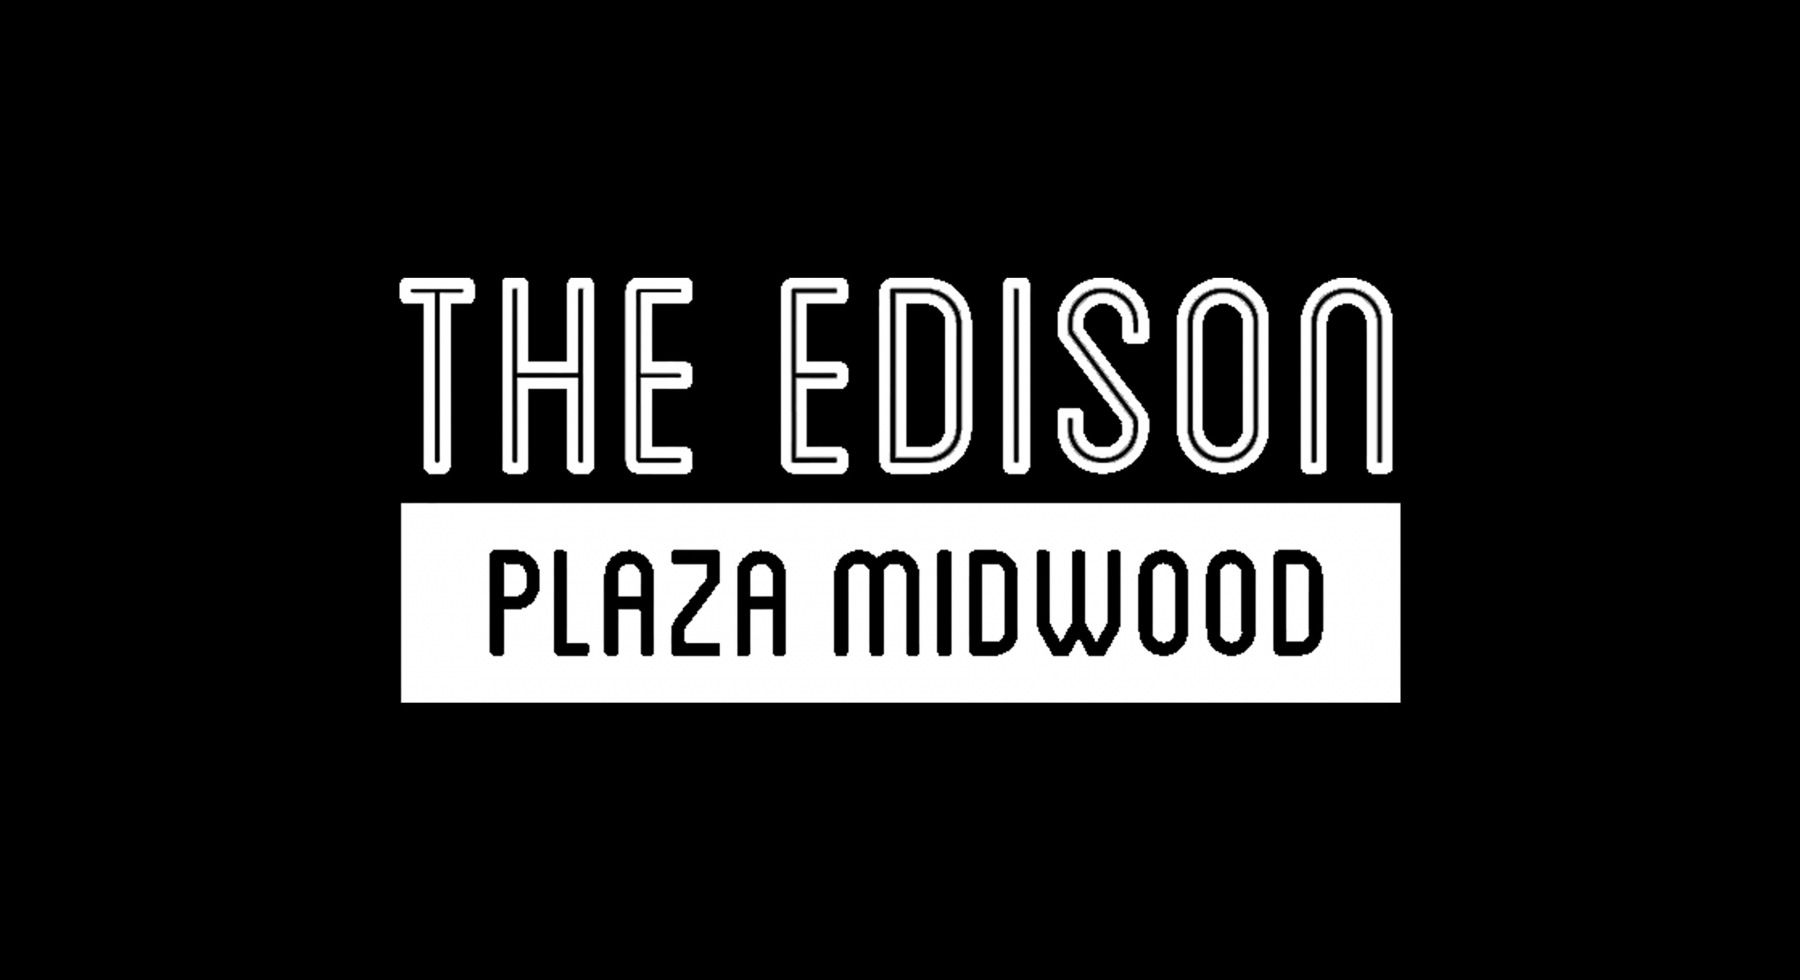 The Edison Welcome Video